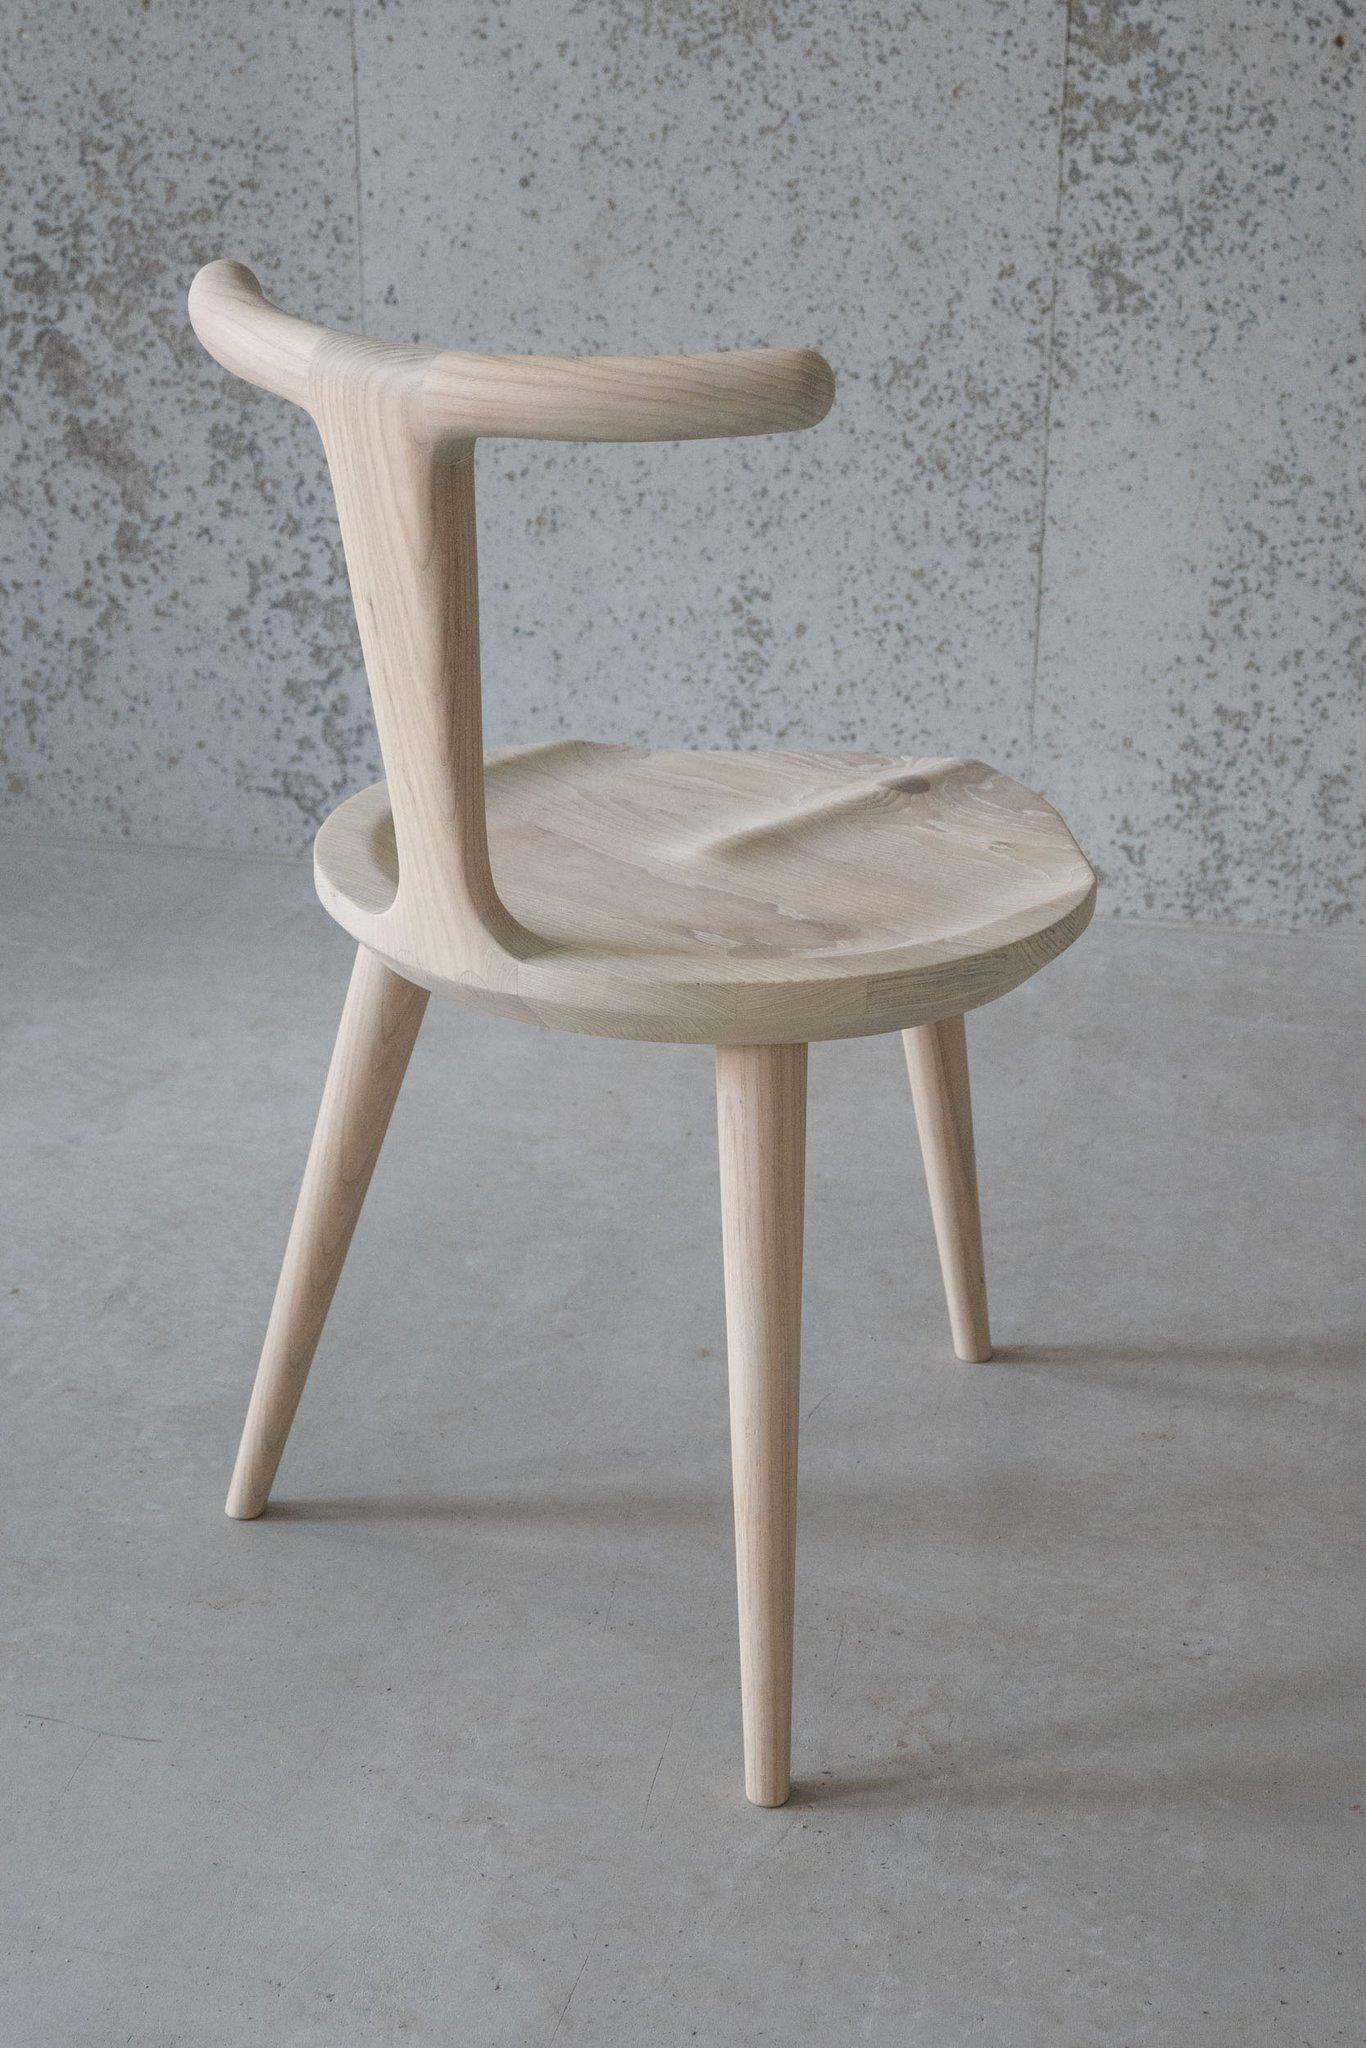 American White Ash Oxbend Chair 3 Legs by Fernweh Woodworking For Sale